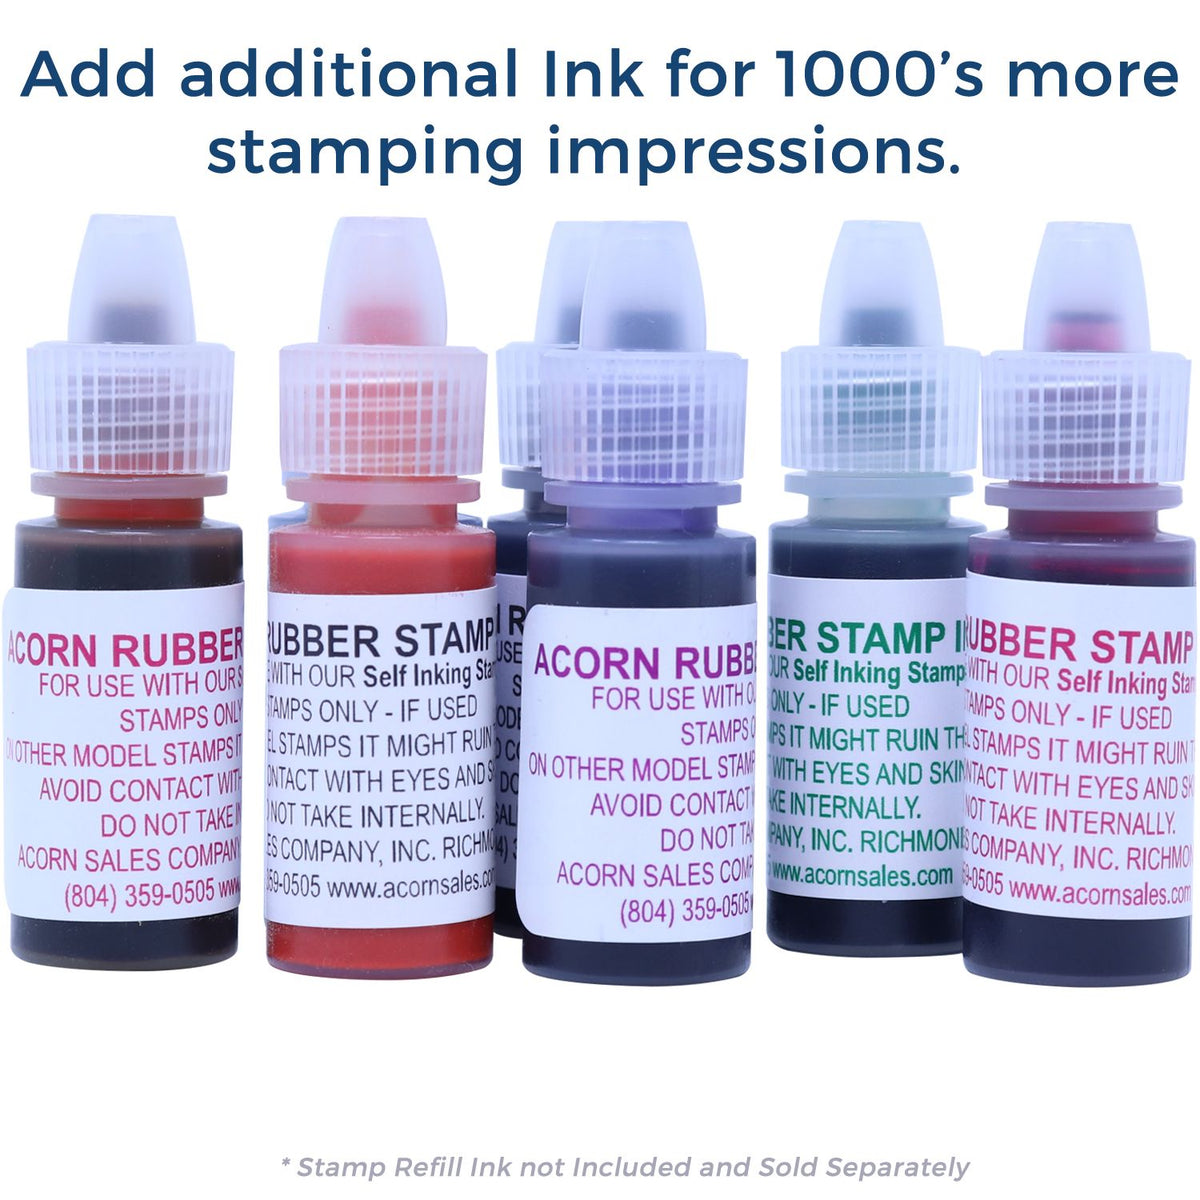 Refill Ink for Self-Inking Round Tounge out smiley Stamp Available